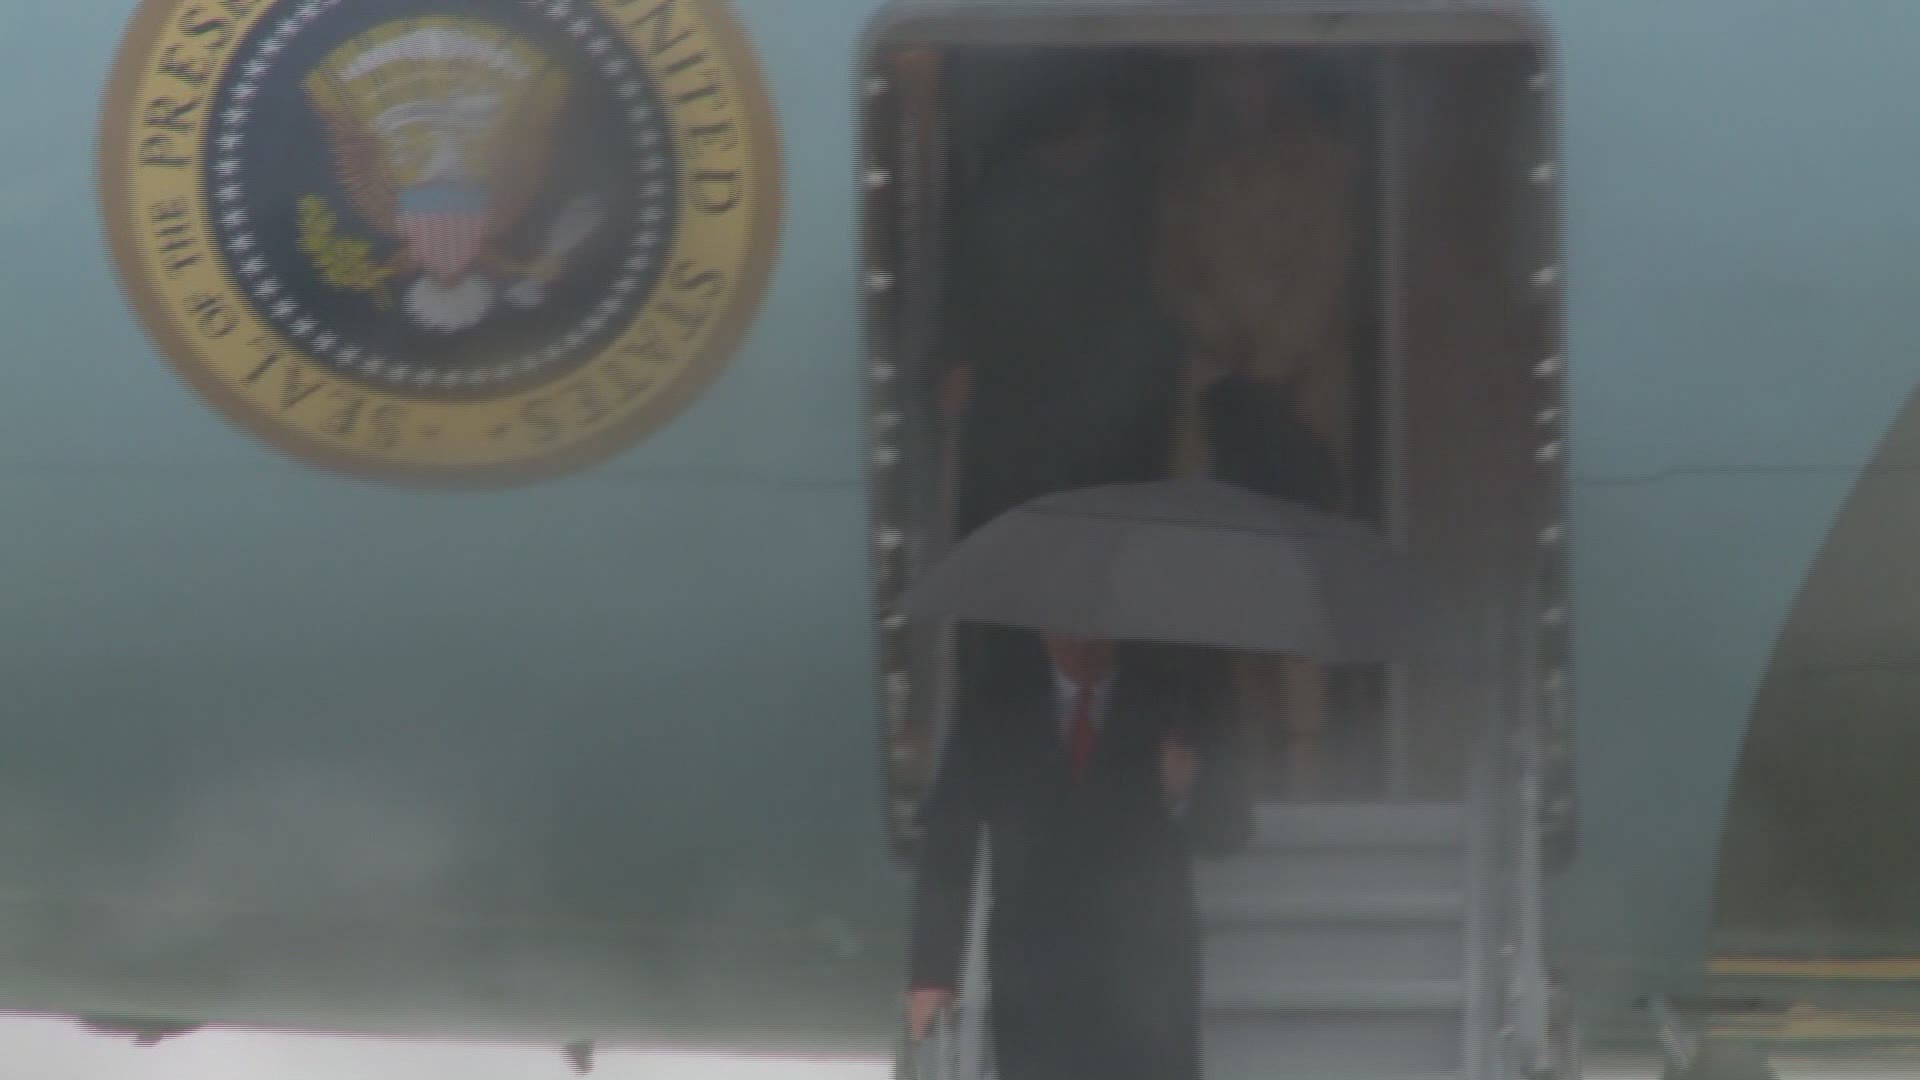 President Trump lands at Cleveland Hopkins airport prior to his visit to Richfield.